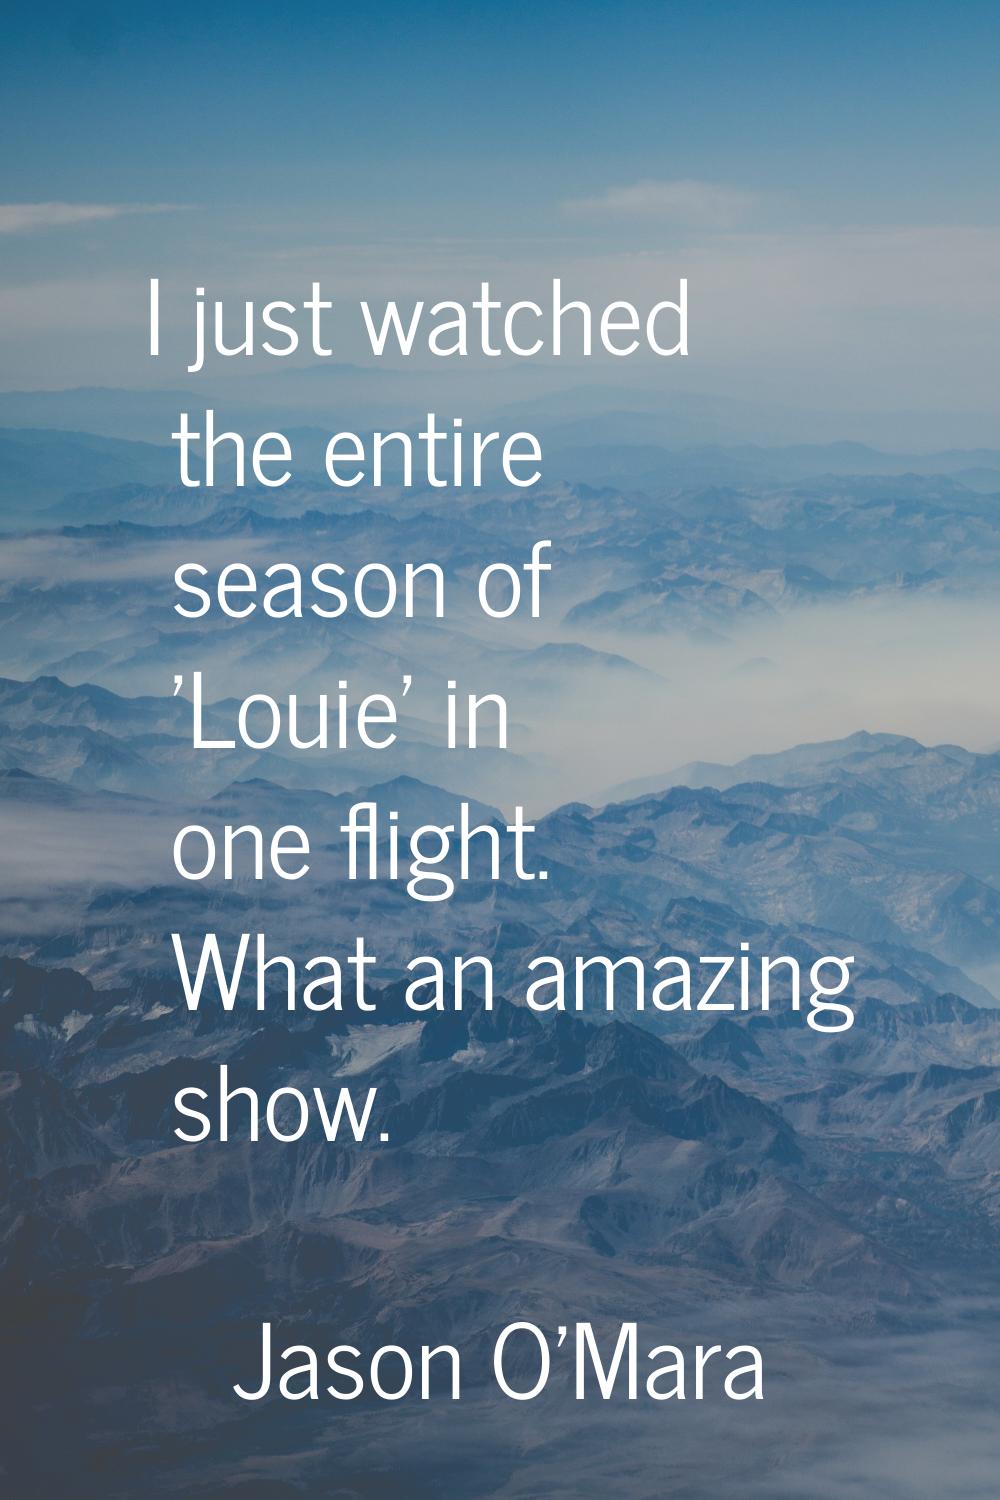 I just watched the entire season of 'Louie' in one flight. What an amazing show.